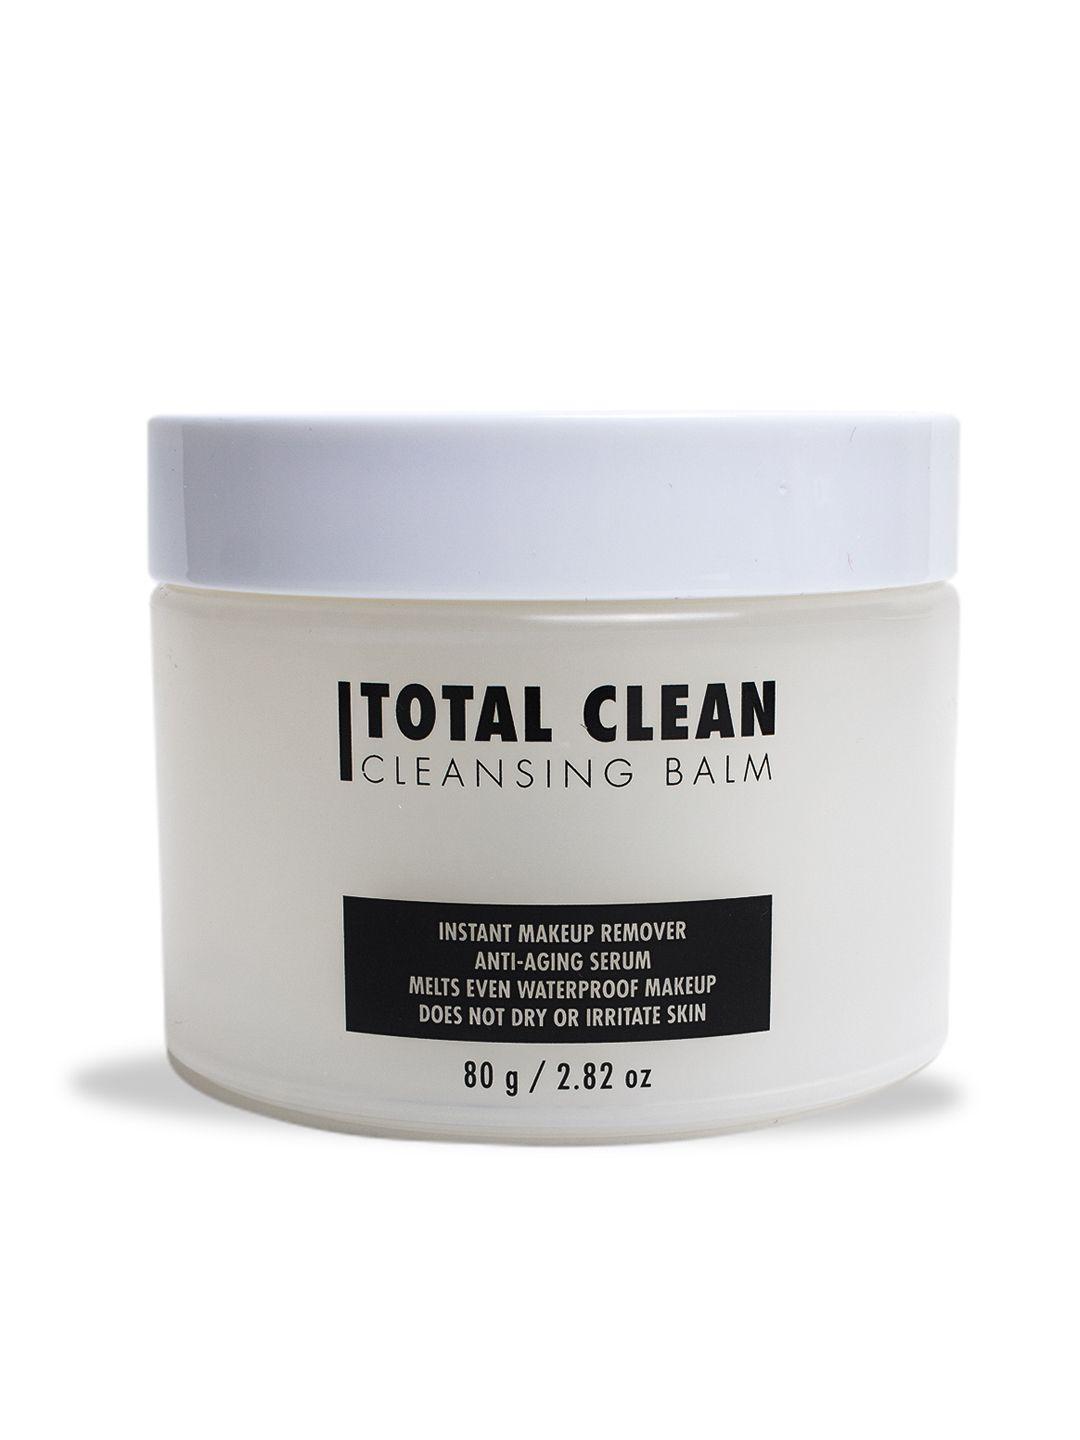 pac total clean instant makeup remover cleansing balm - 80 g